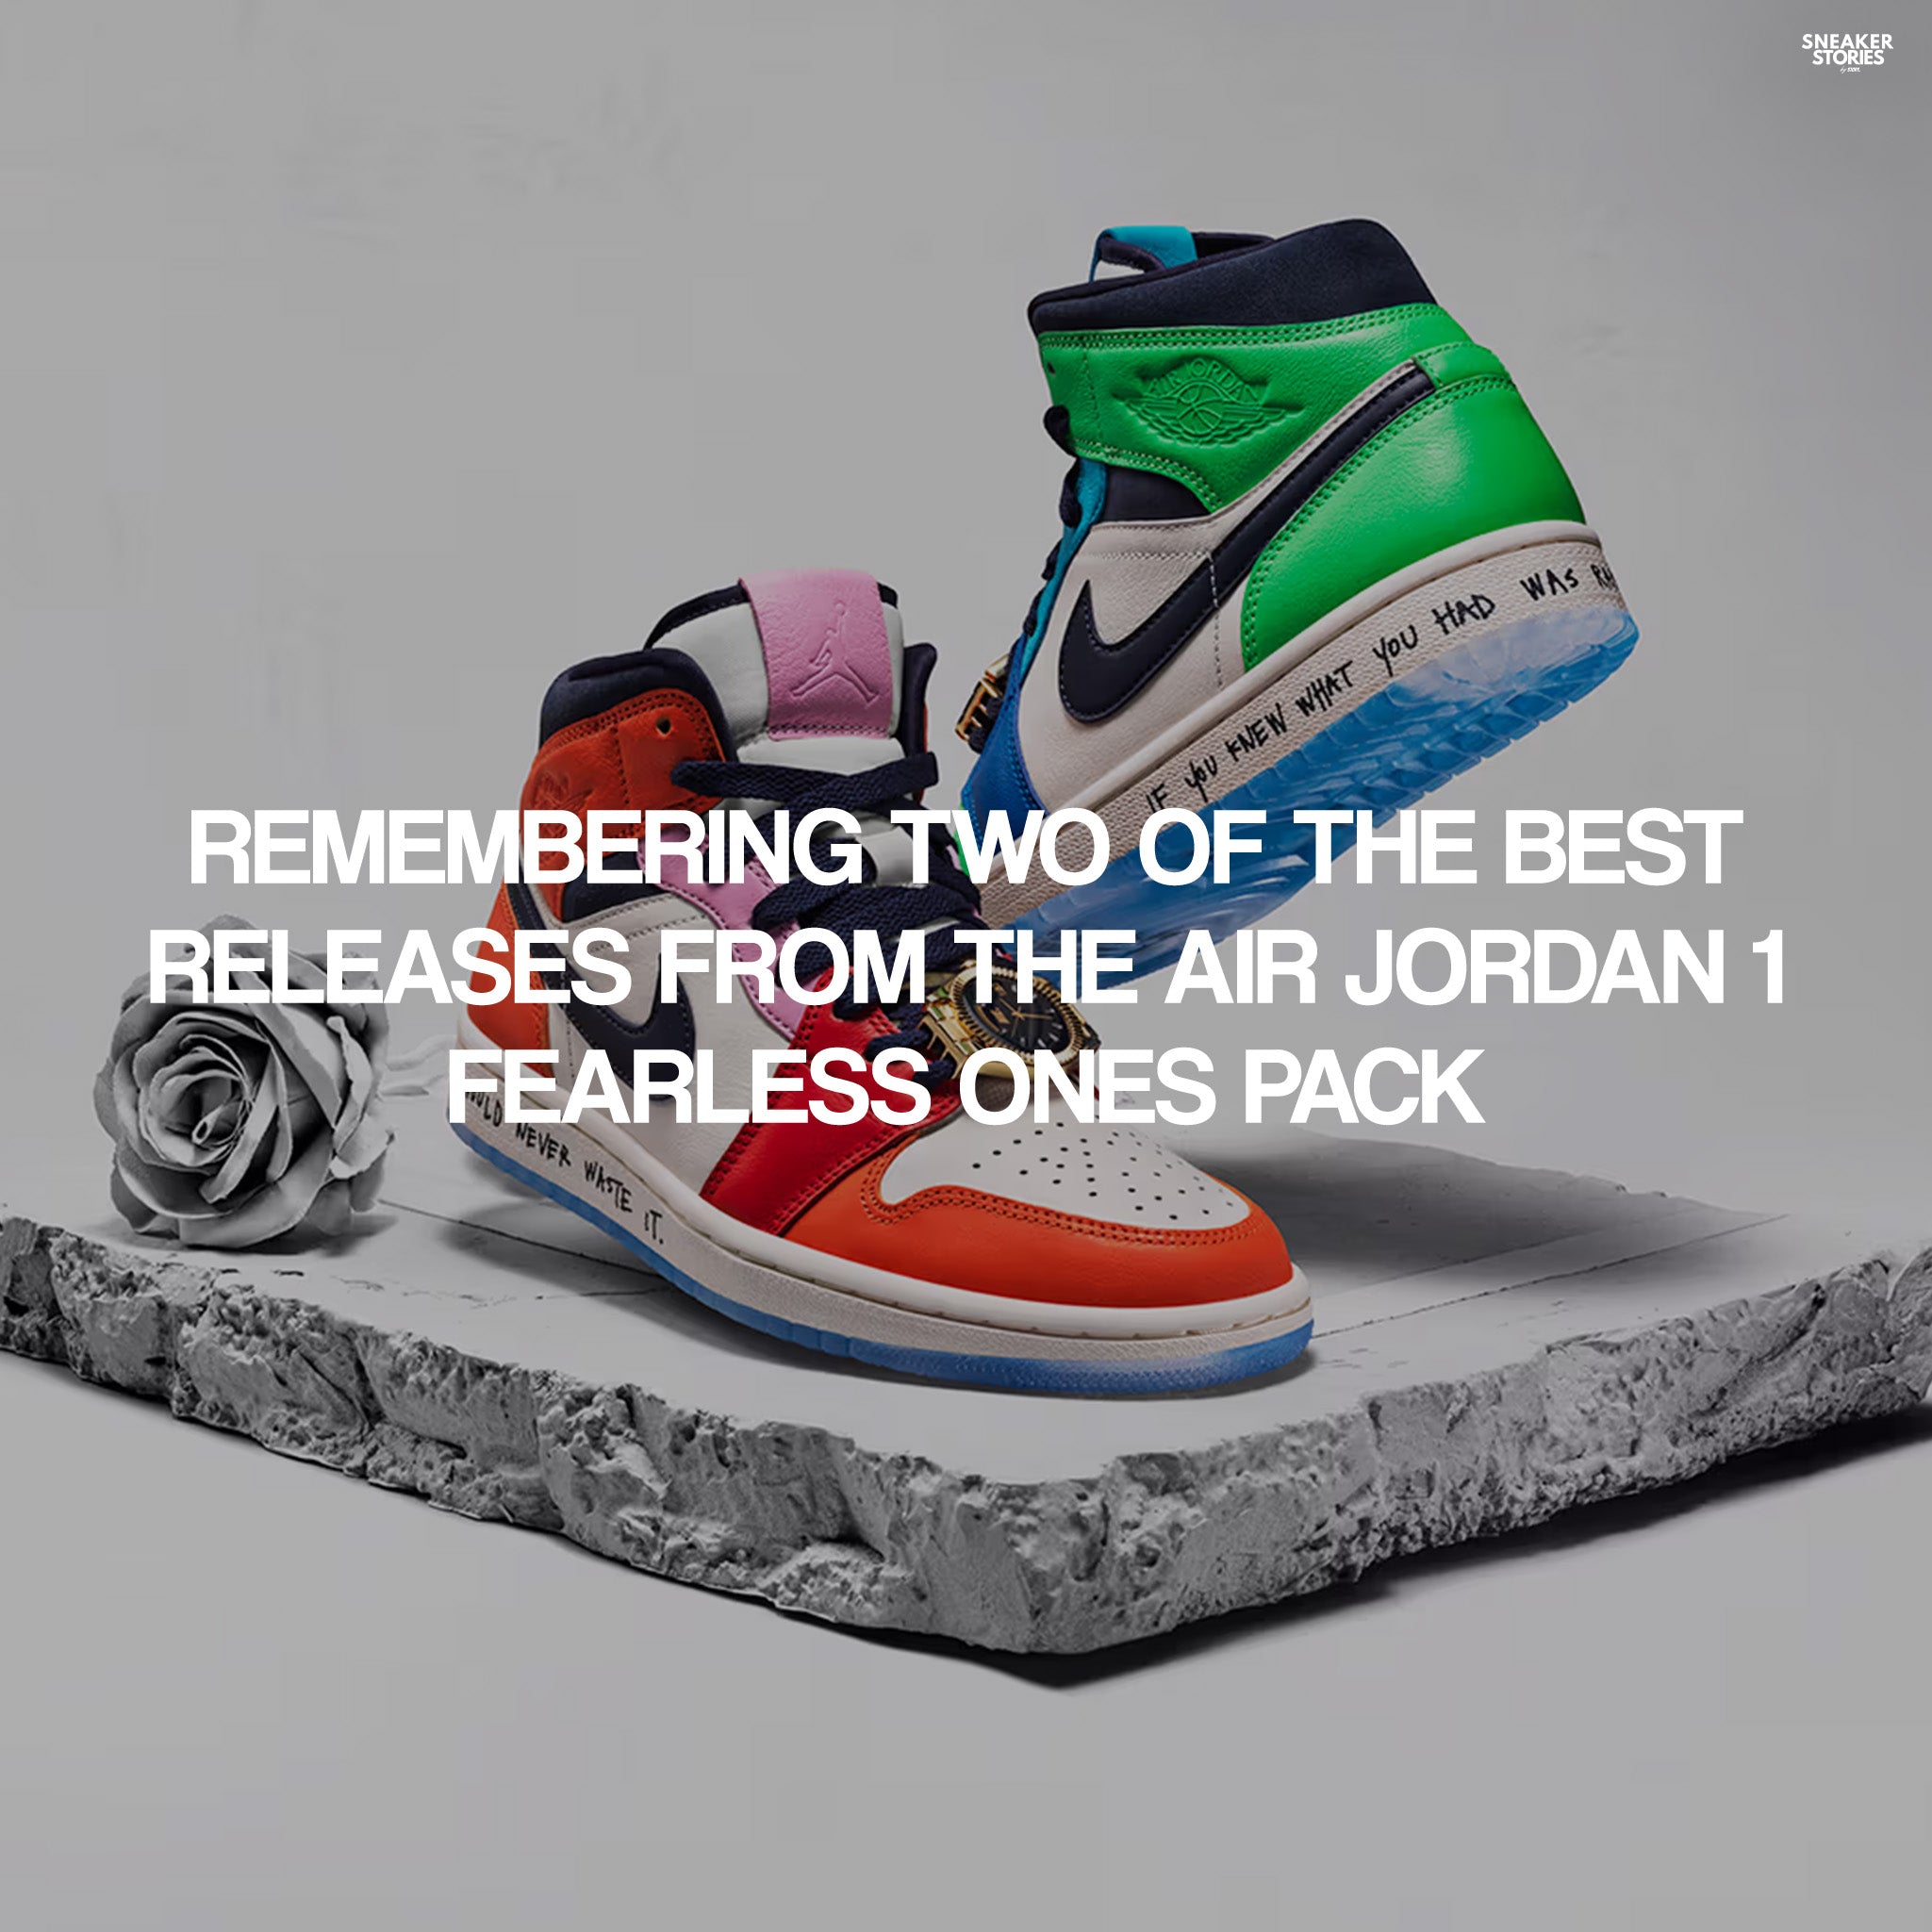 Remembering two of the best releases from the Air Jordan 1 Fearless ones pack